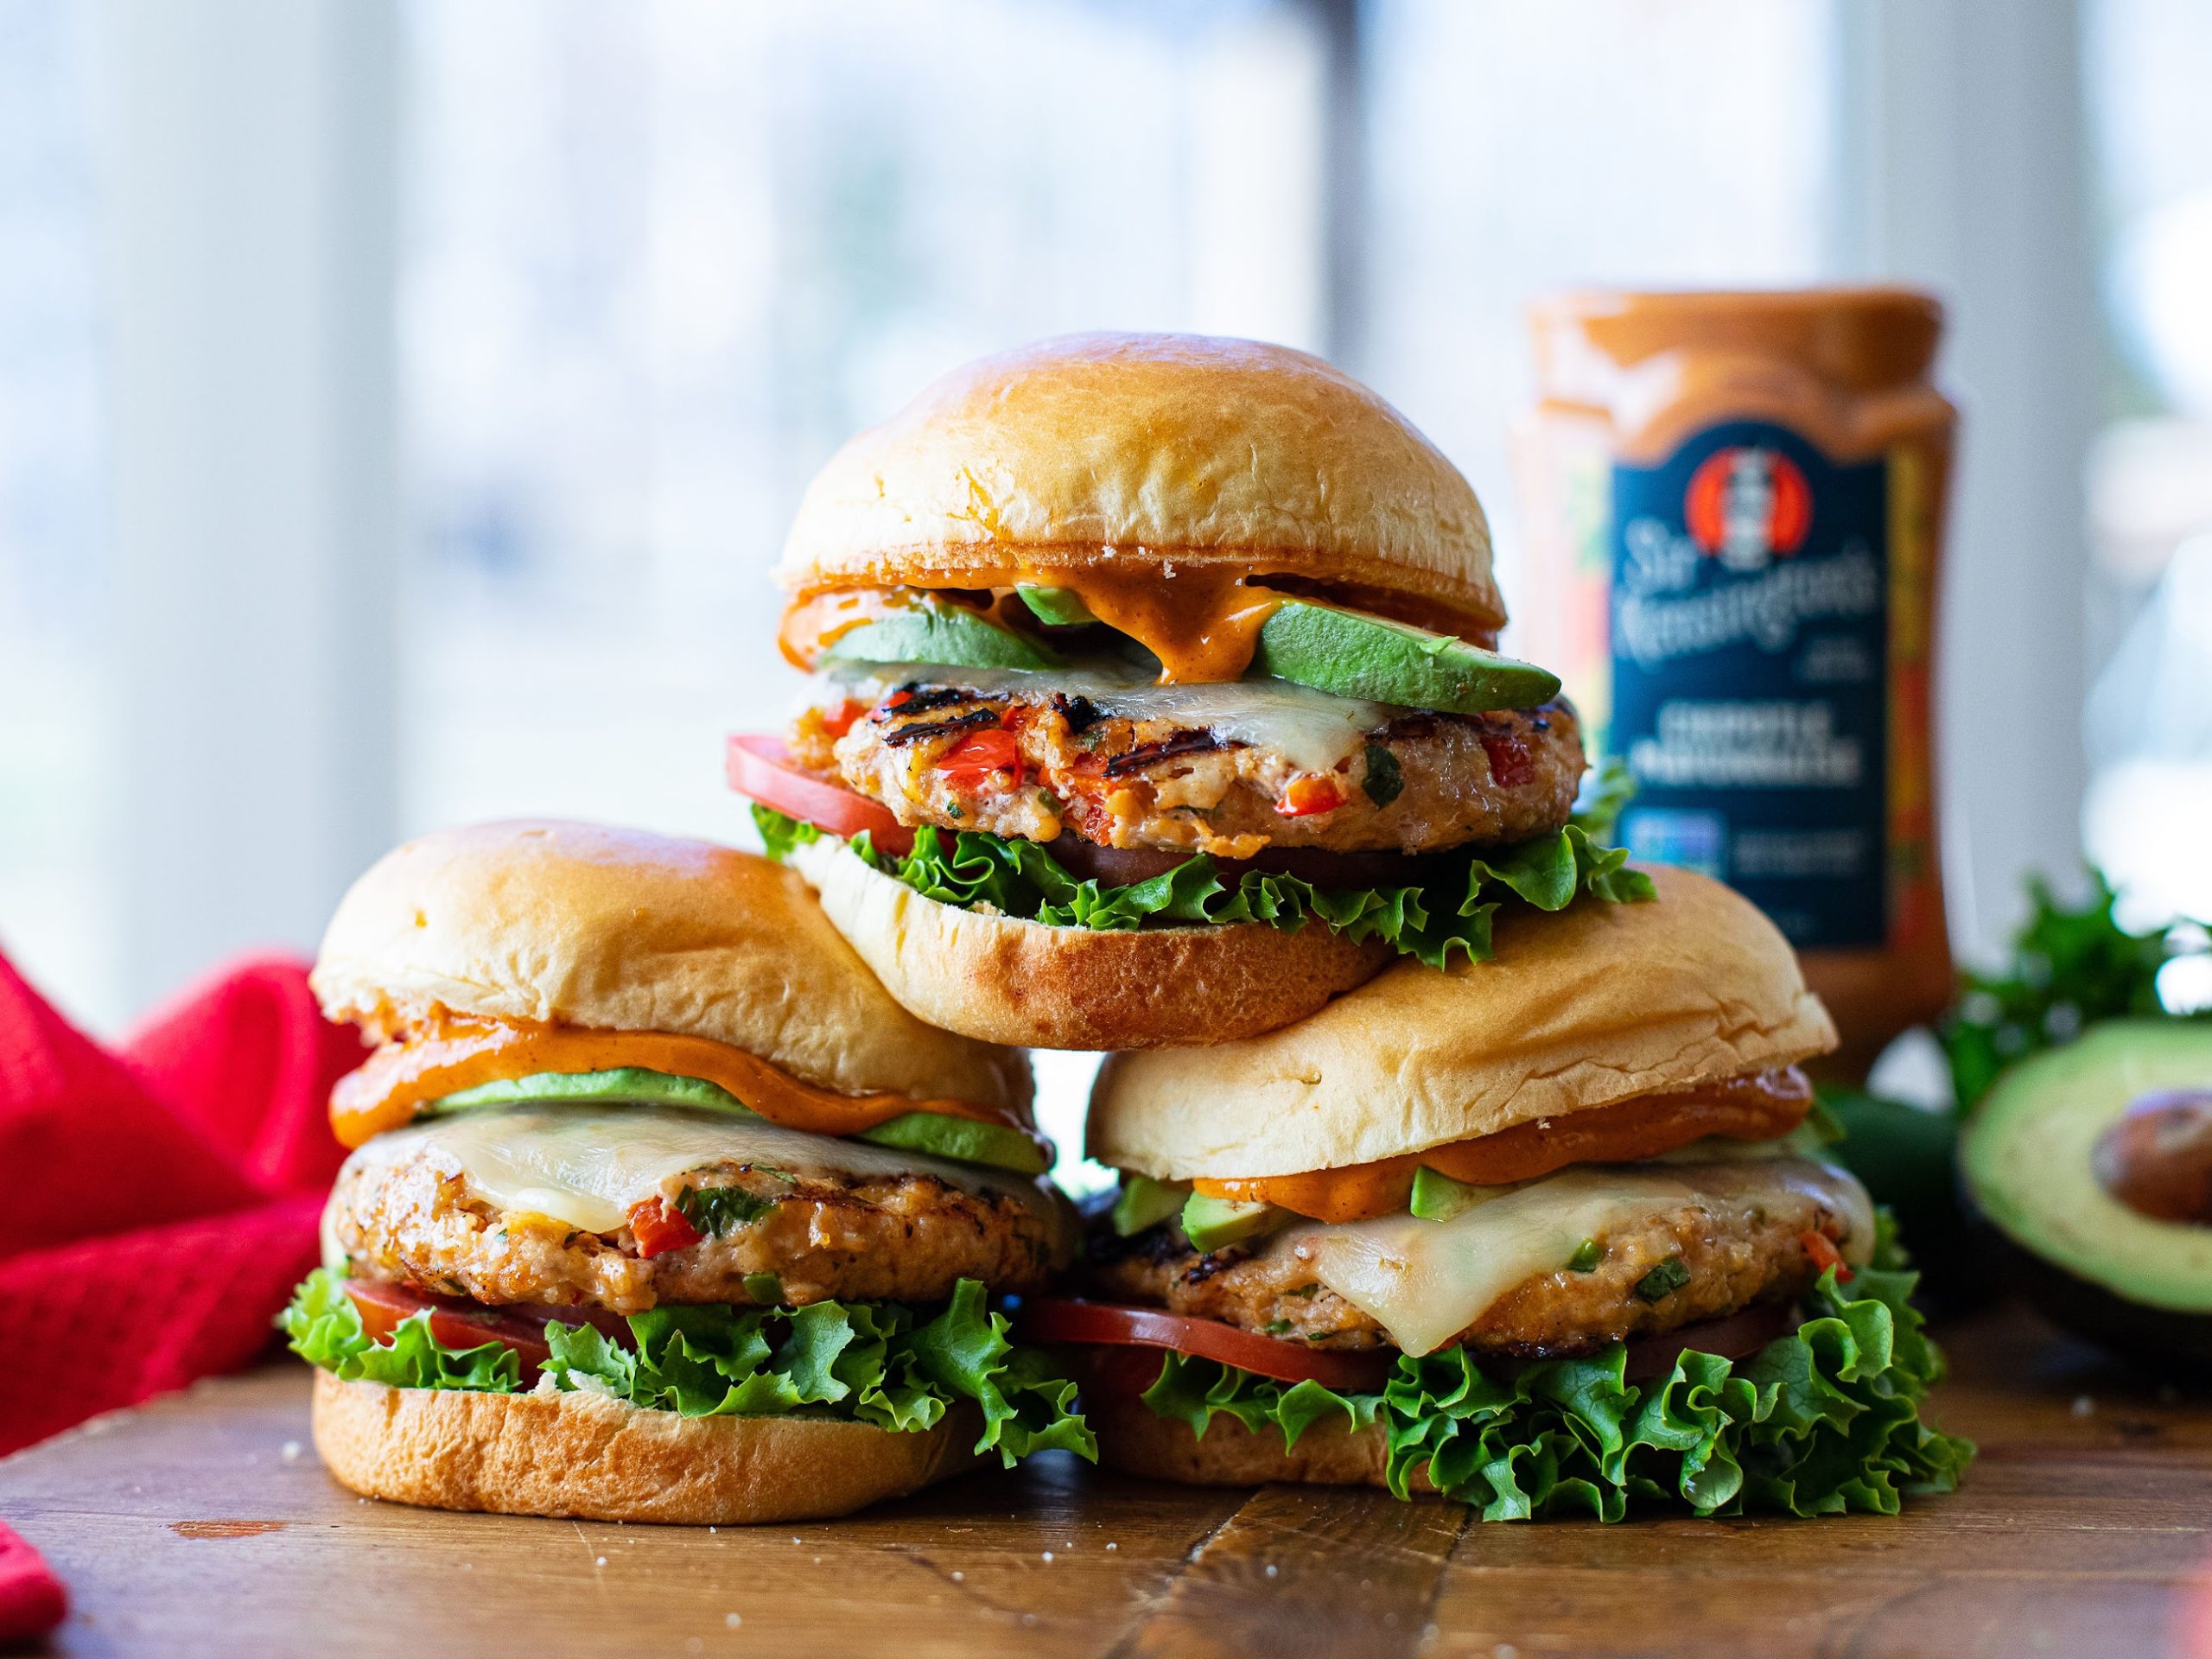 Grab Delicious Meal Essentials And Save BIG At Publix - Try My Chipotle Chicken Burgers on I Heart Publix 5